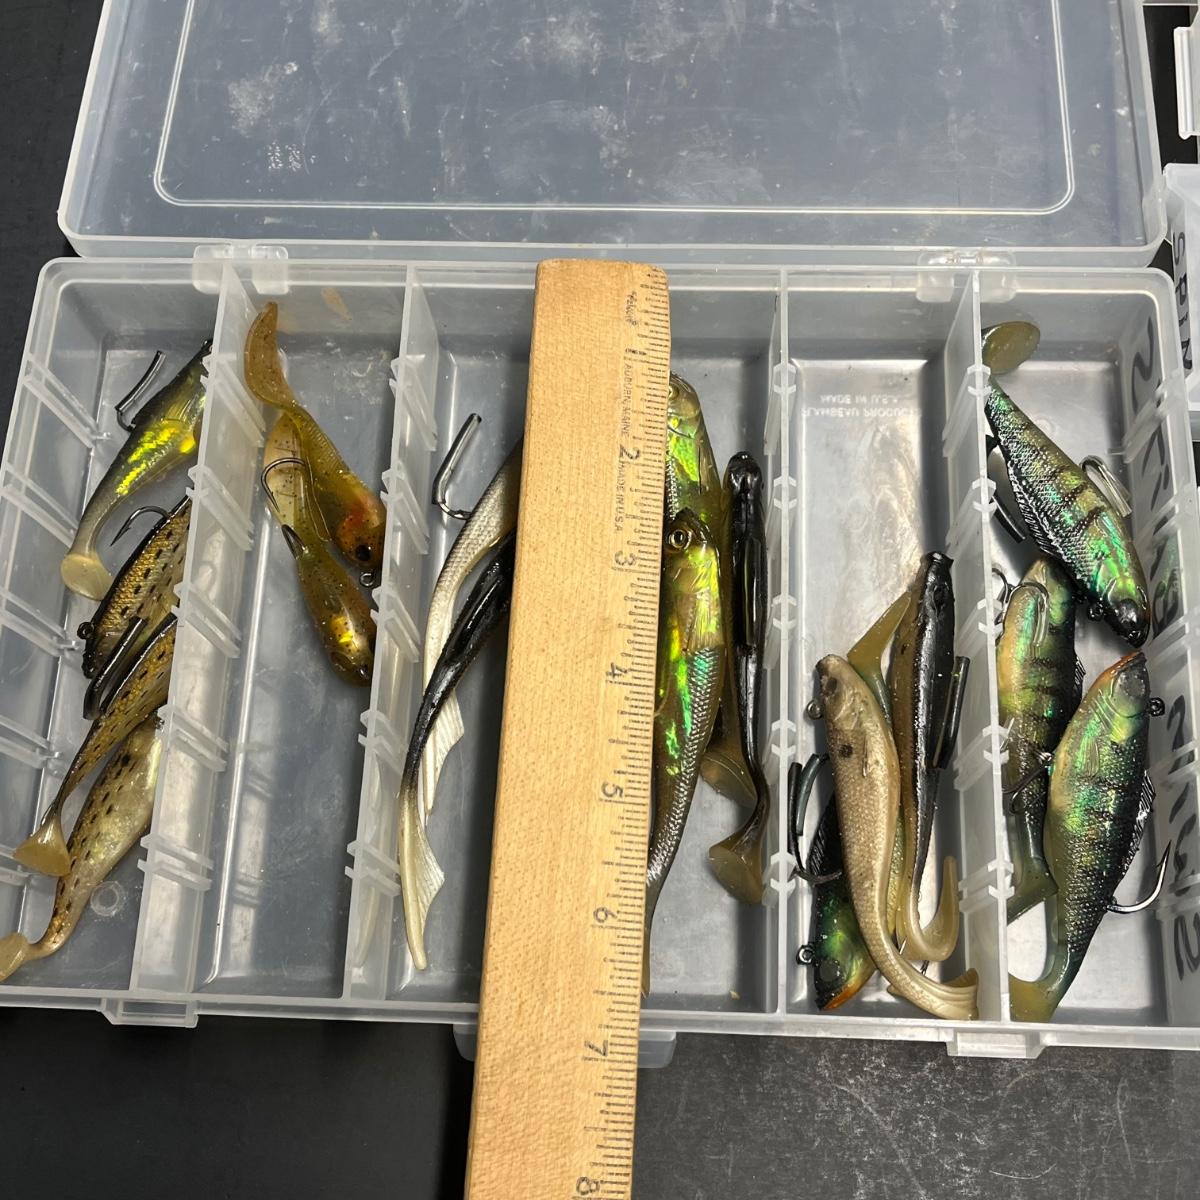 LOT 161B: Artificial Fishing Baits / Lures - Shad, Frogs and More